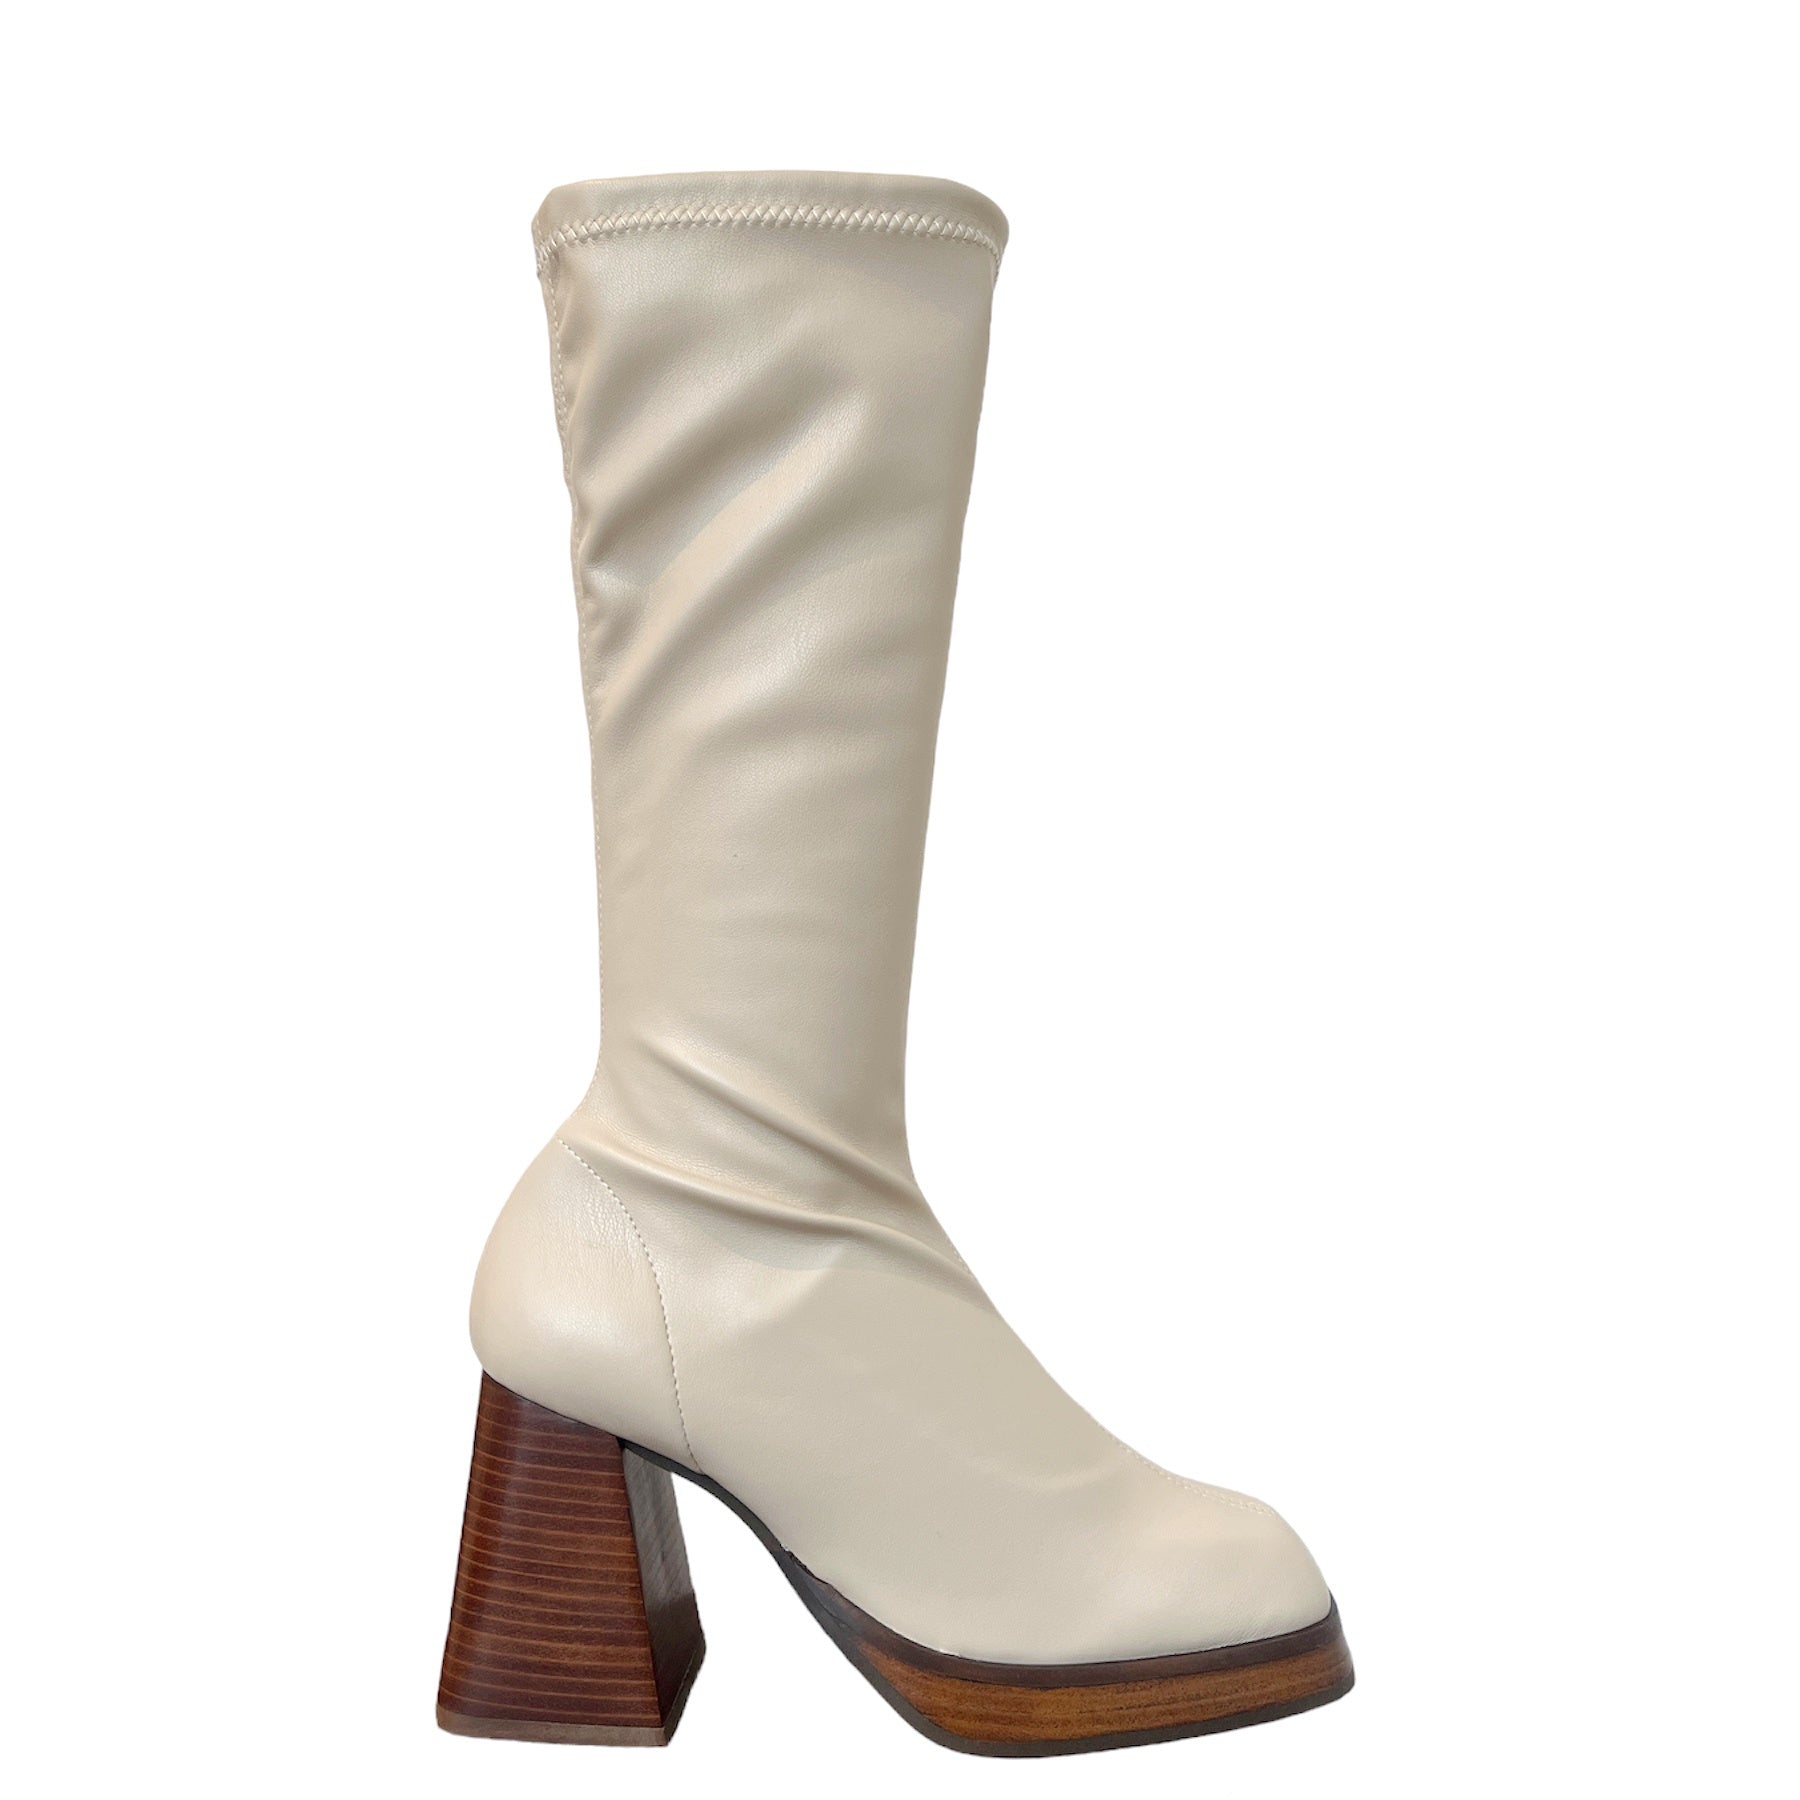 ANGEL ALARCON - MANAGUA TALL BOOT 23609-871C IN BEIGE SYNTHETIC LEATHER